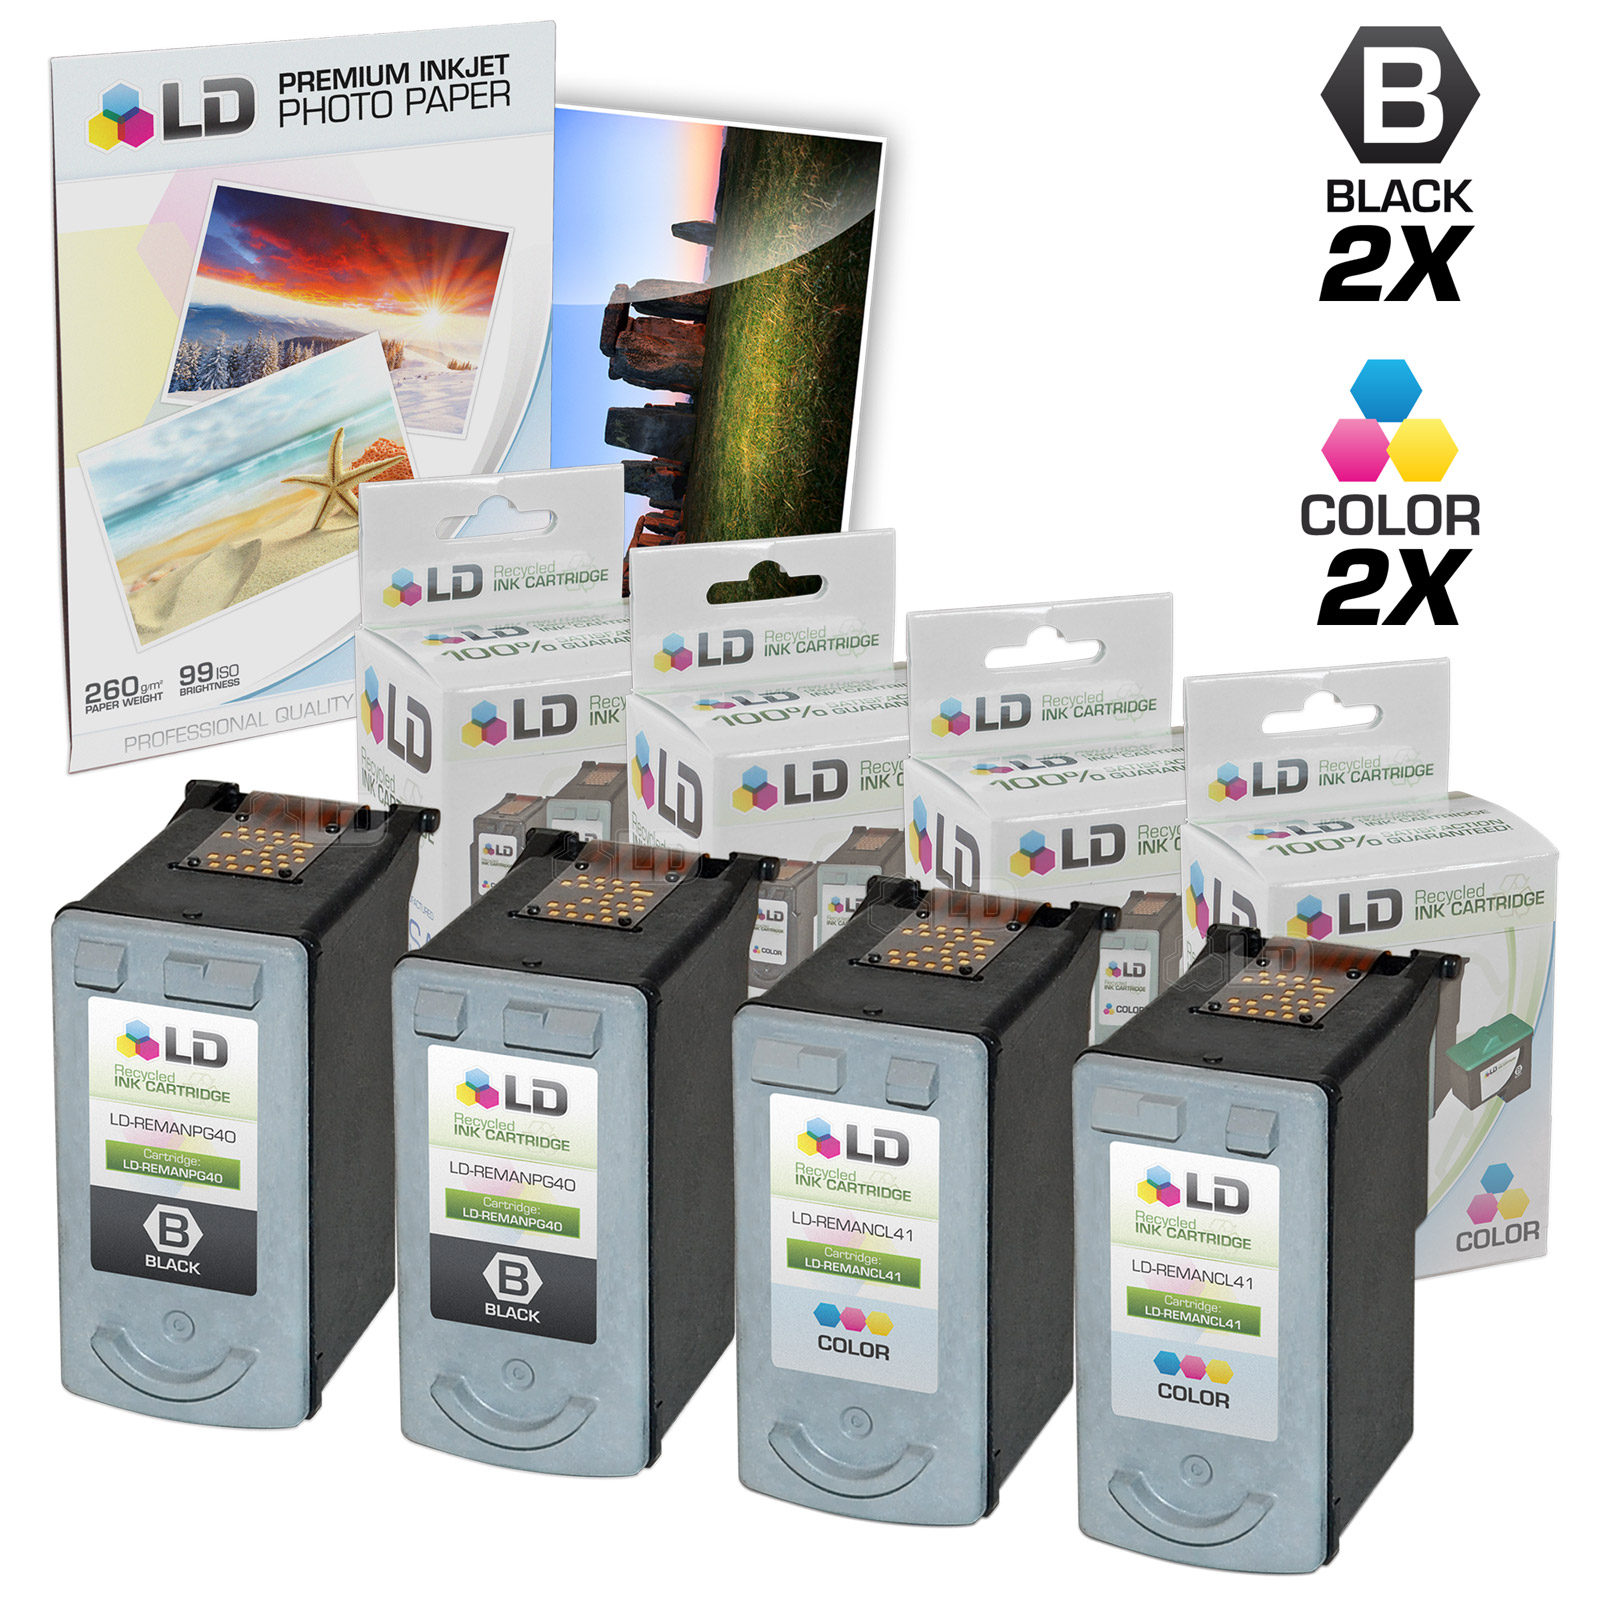 LD Remanufactured Cartridge Replacement for Canon PG-40 & CL-41 (2 Black, 2 Color, 4-Pack) - image 1 of 1